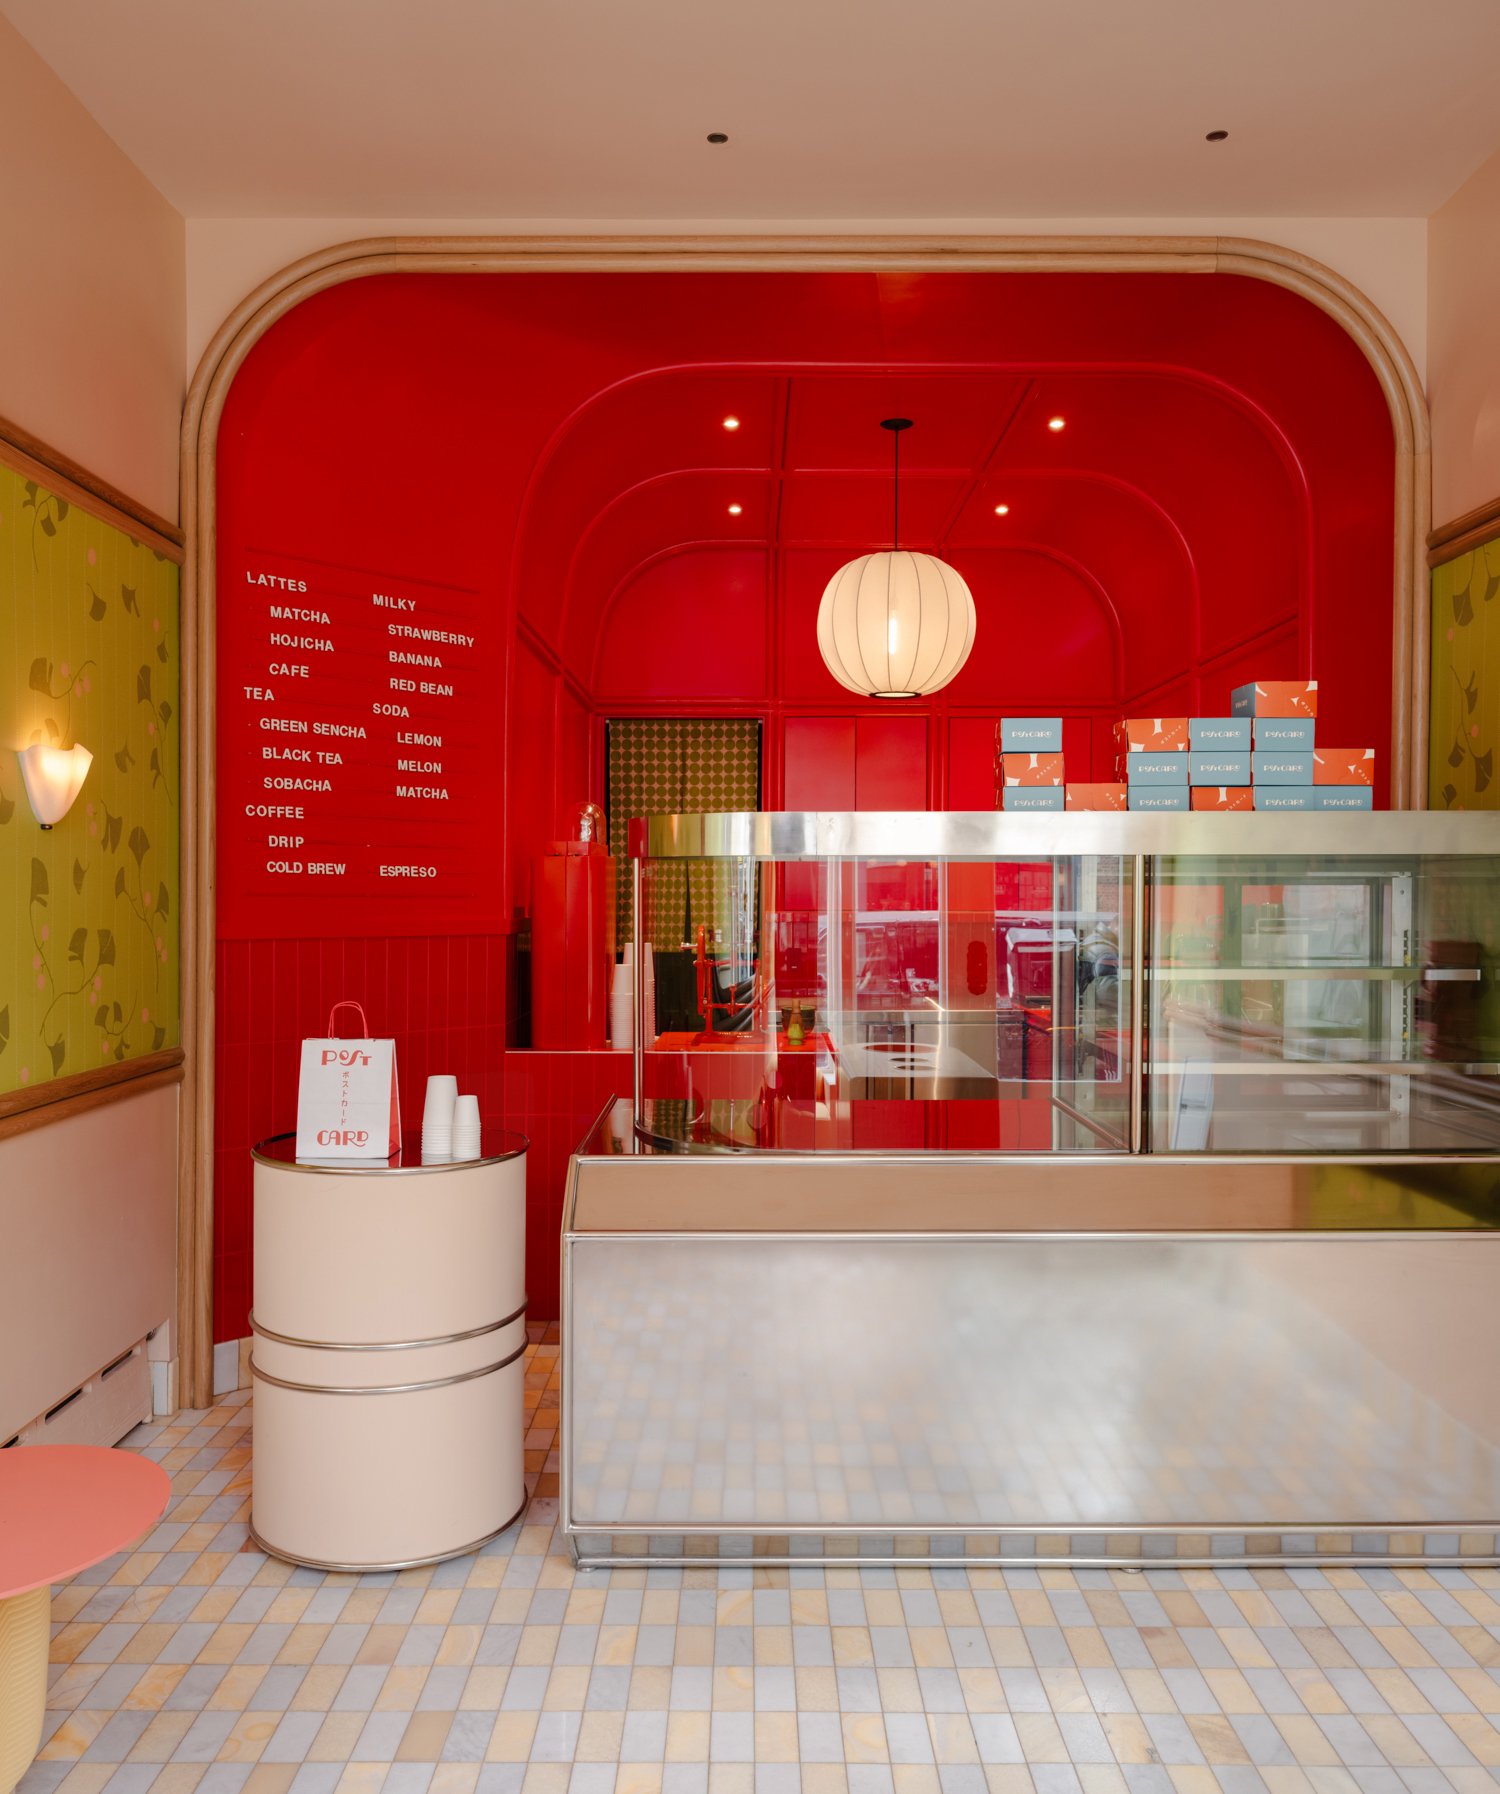 Postcard Bakery Stands Out with an Otherworldly Vintage Aesthetic from LMNOP Creative